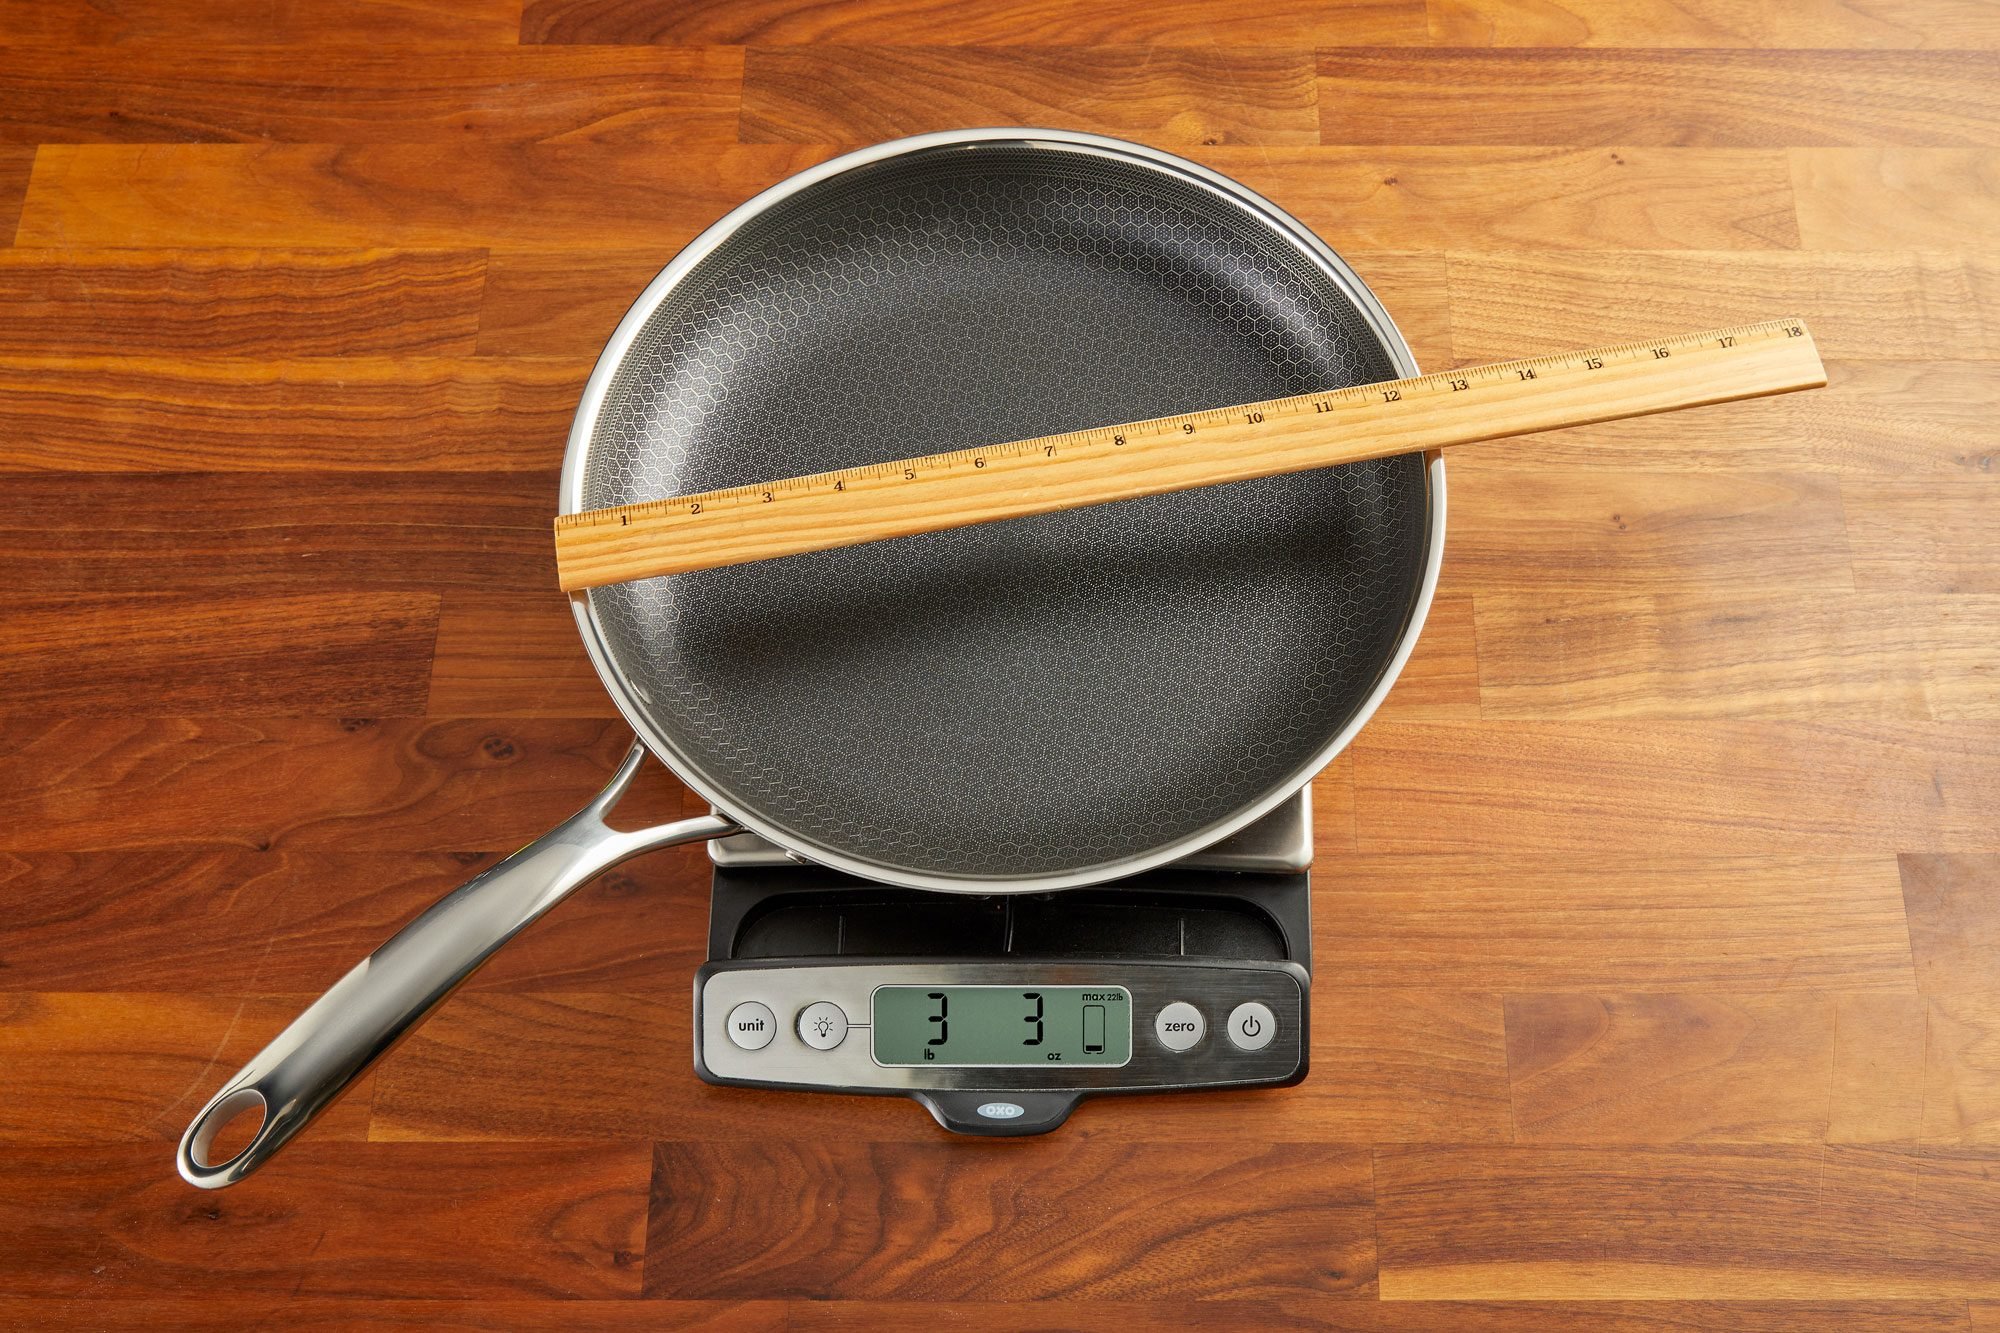 HexClad vs. Stainless Steel Cookware (7 Key Differences) - Prudent